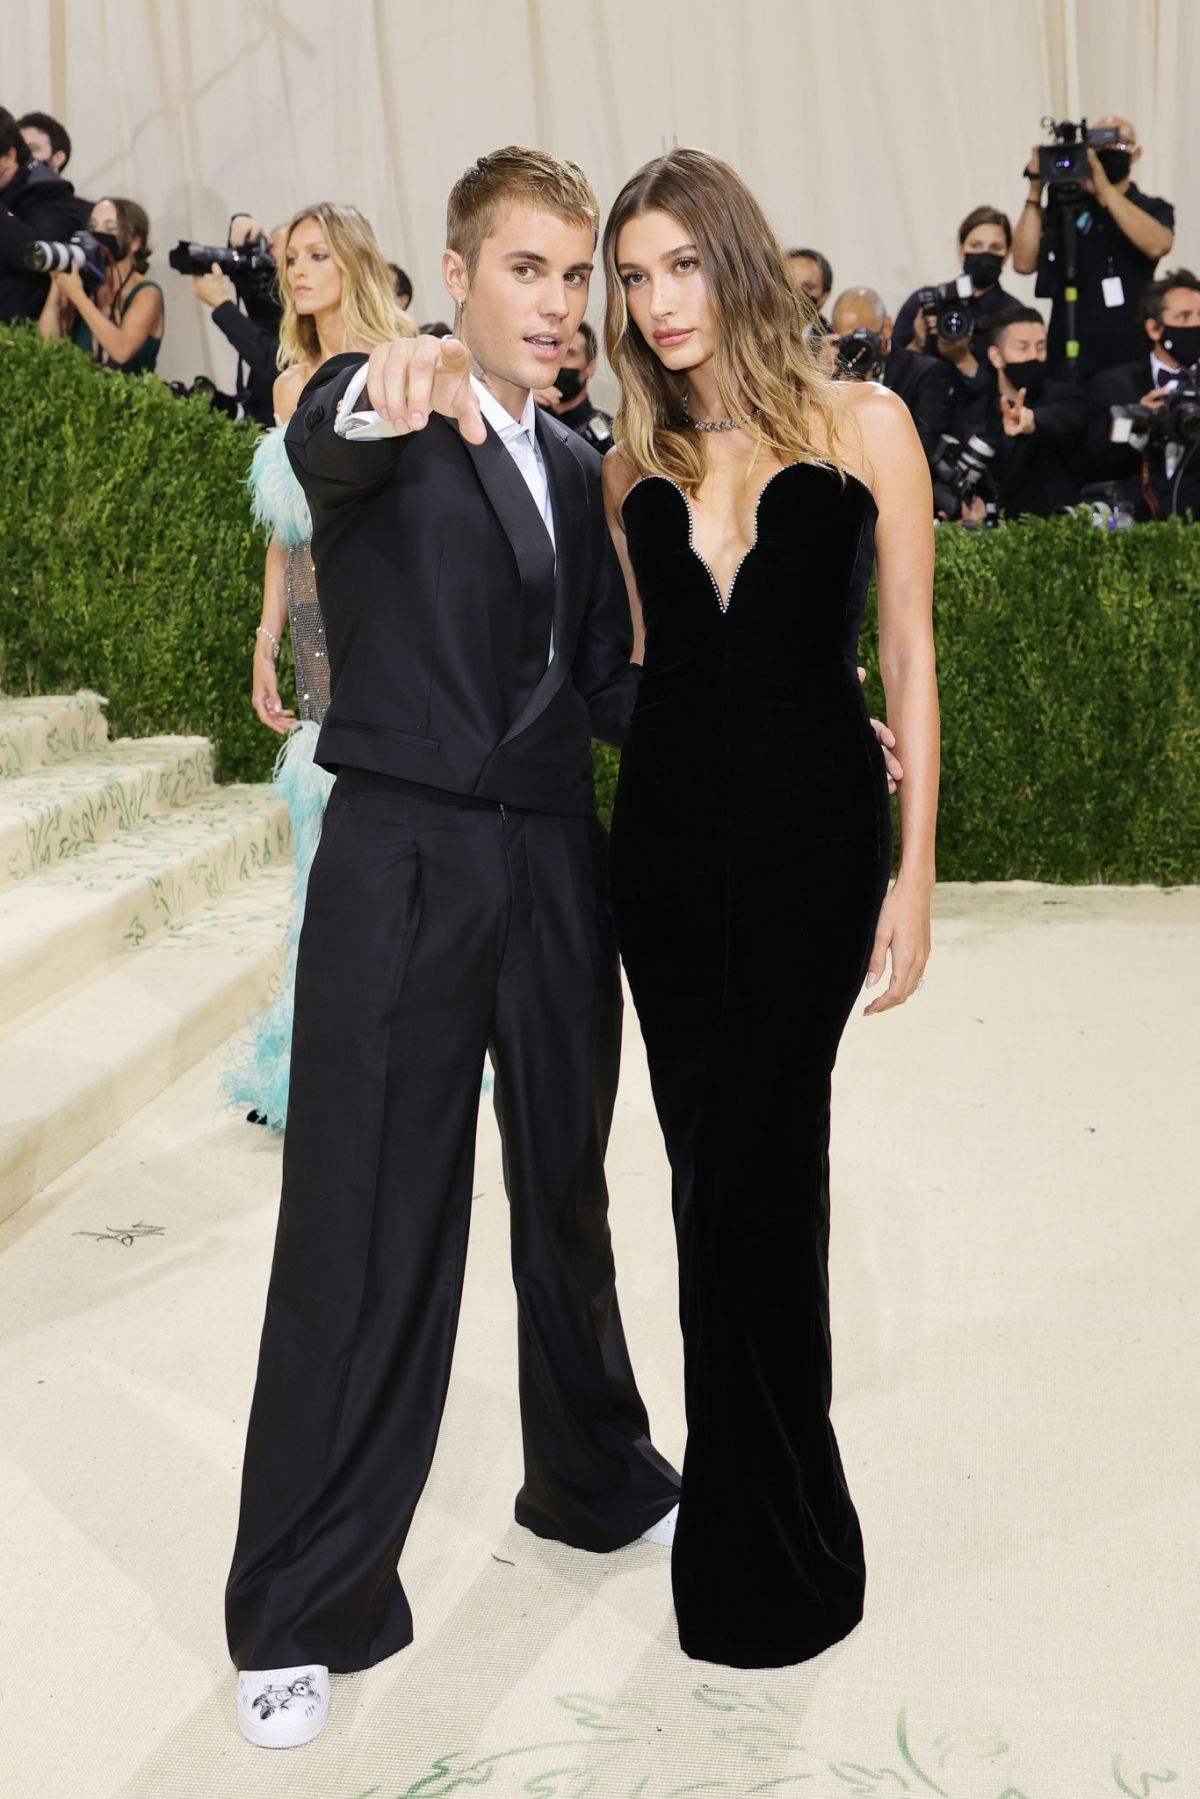 hailey-and-justin-bieber-at-2021-met-gala-in-new-york-09-13-2021-9.jpg